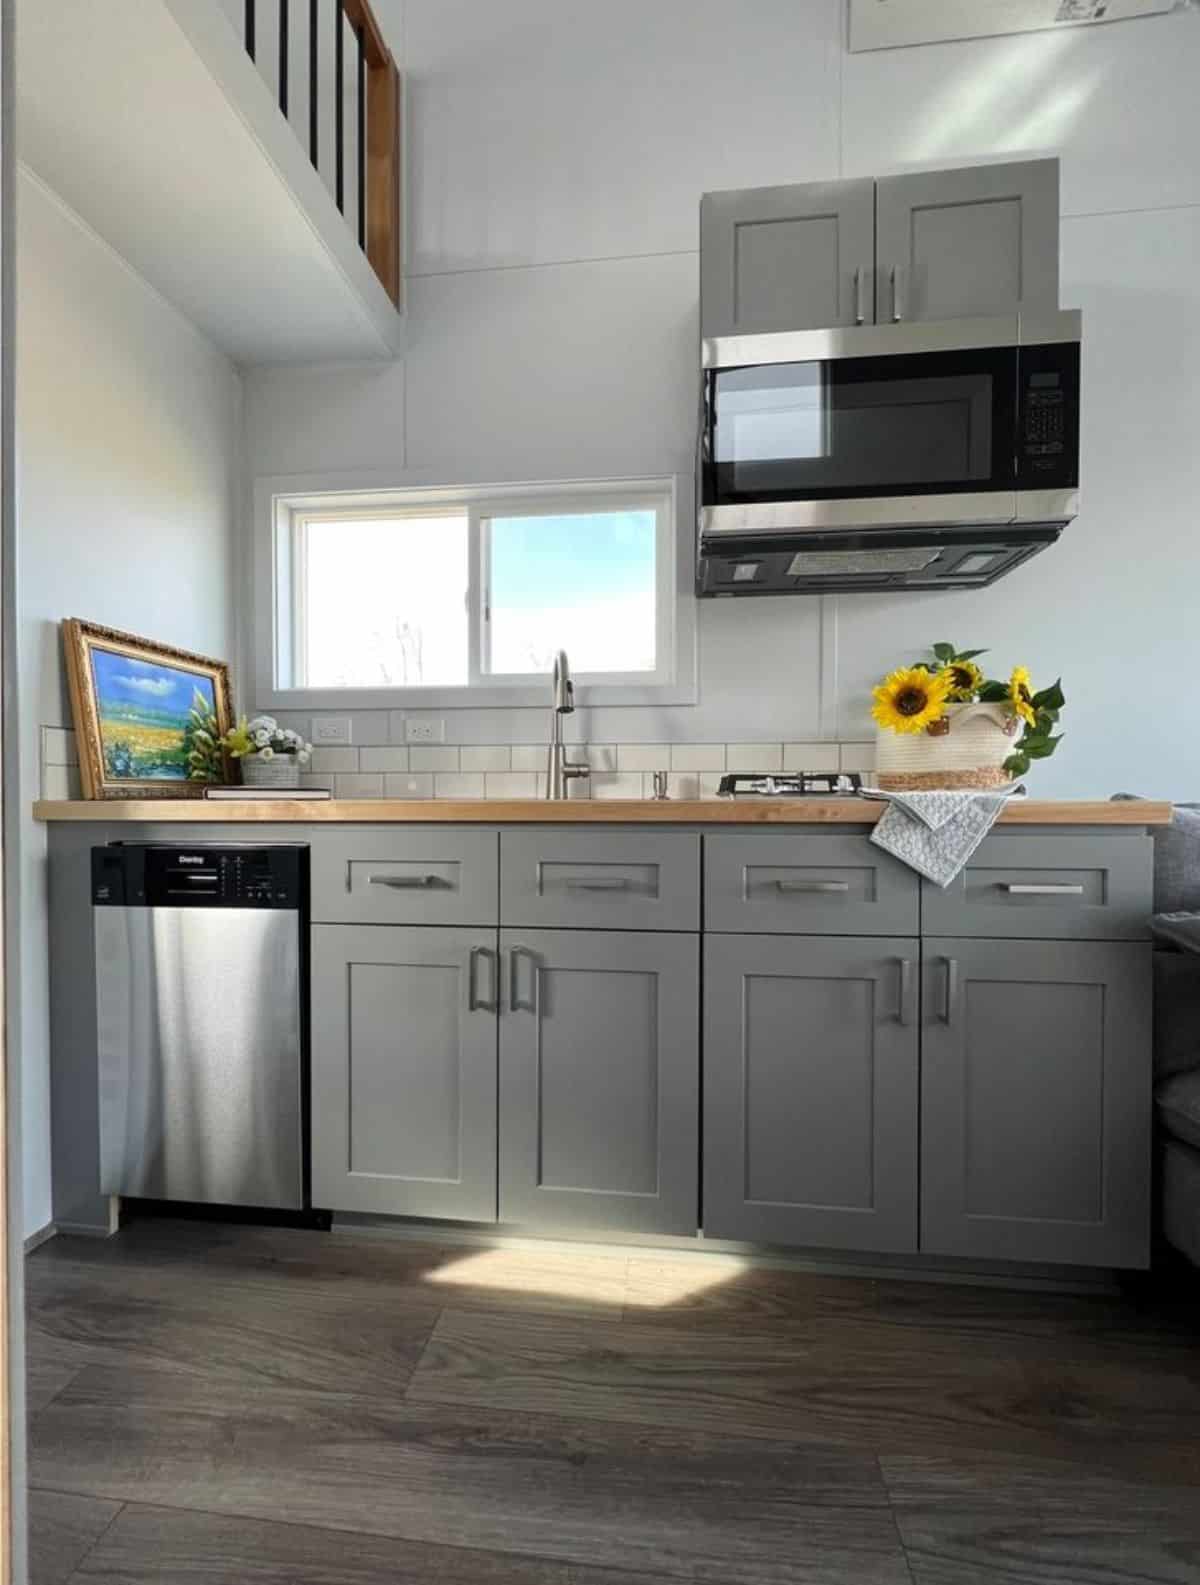 kitchen area of tiny house has all the essential appliances and storage cabinets